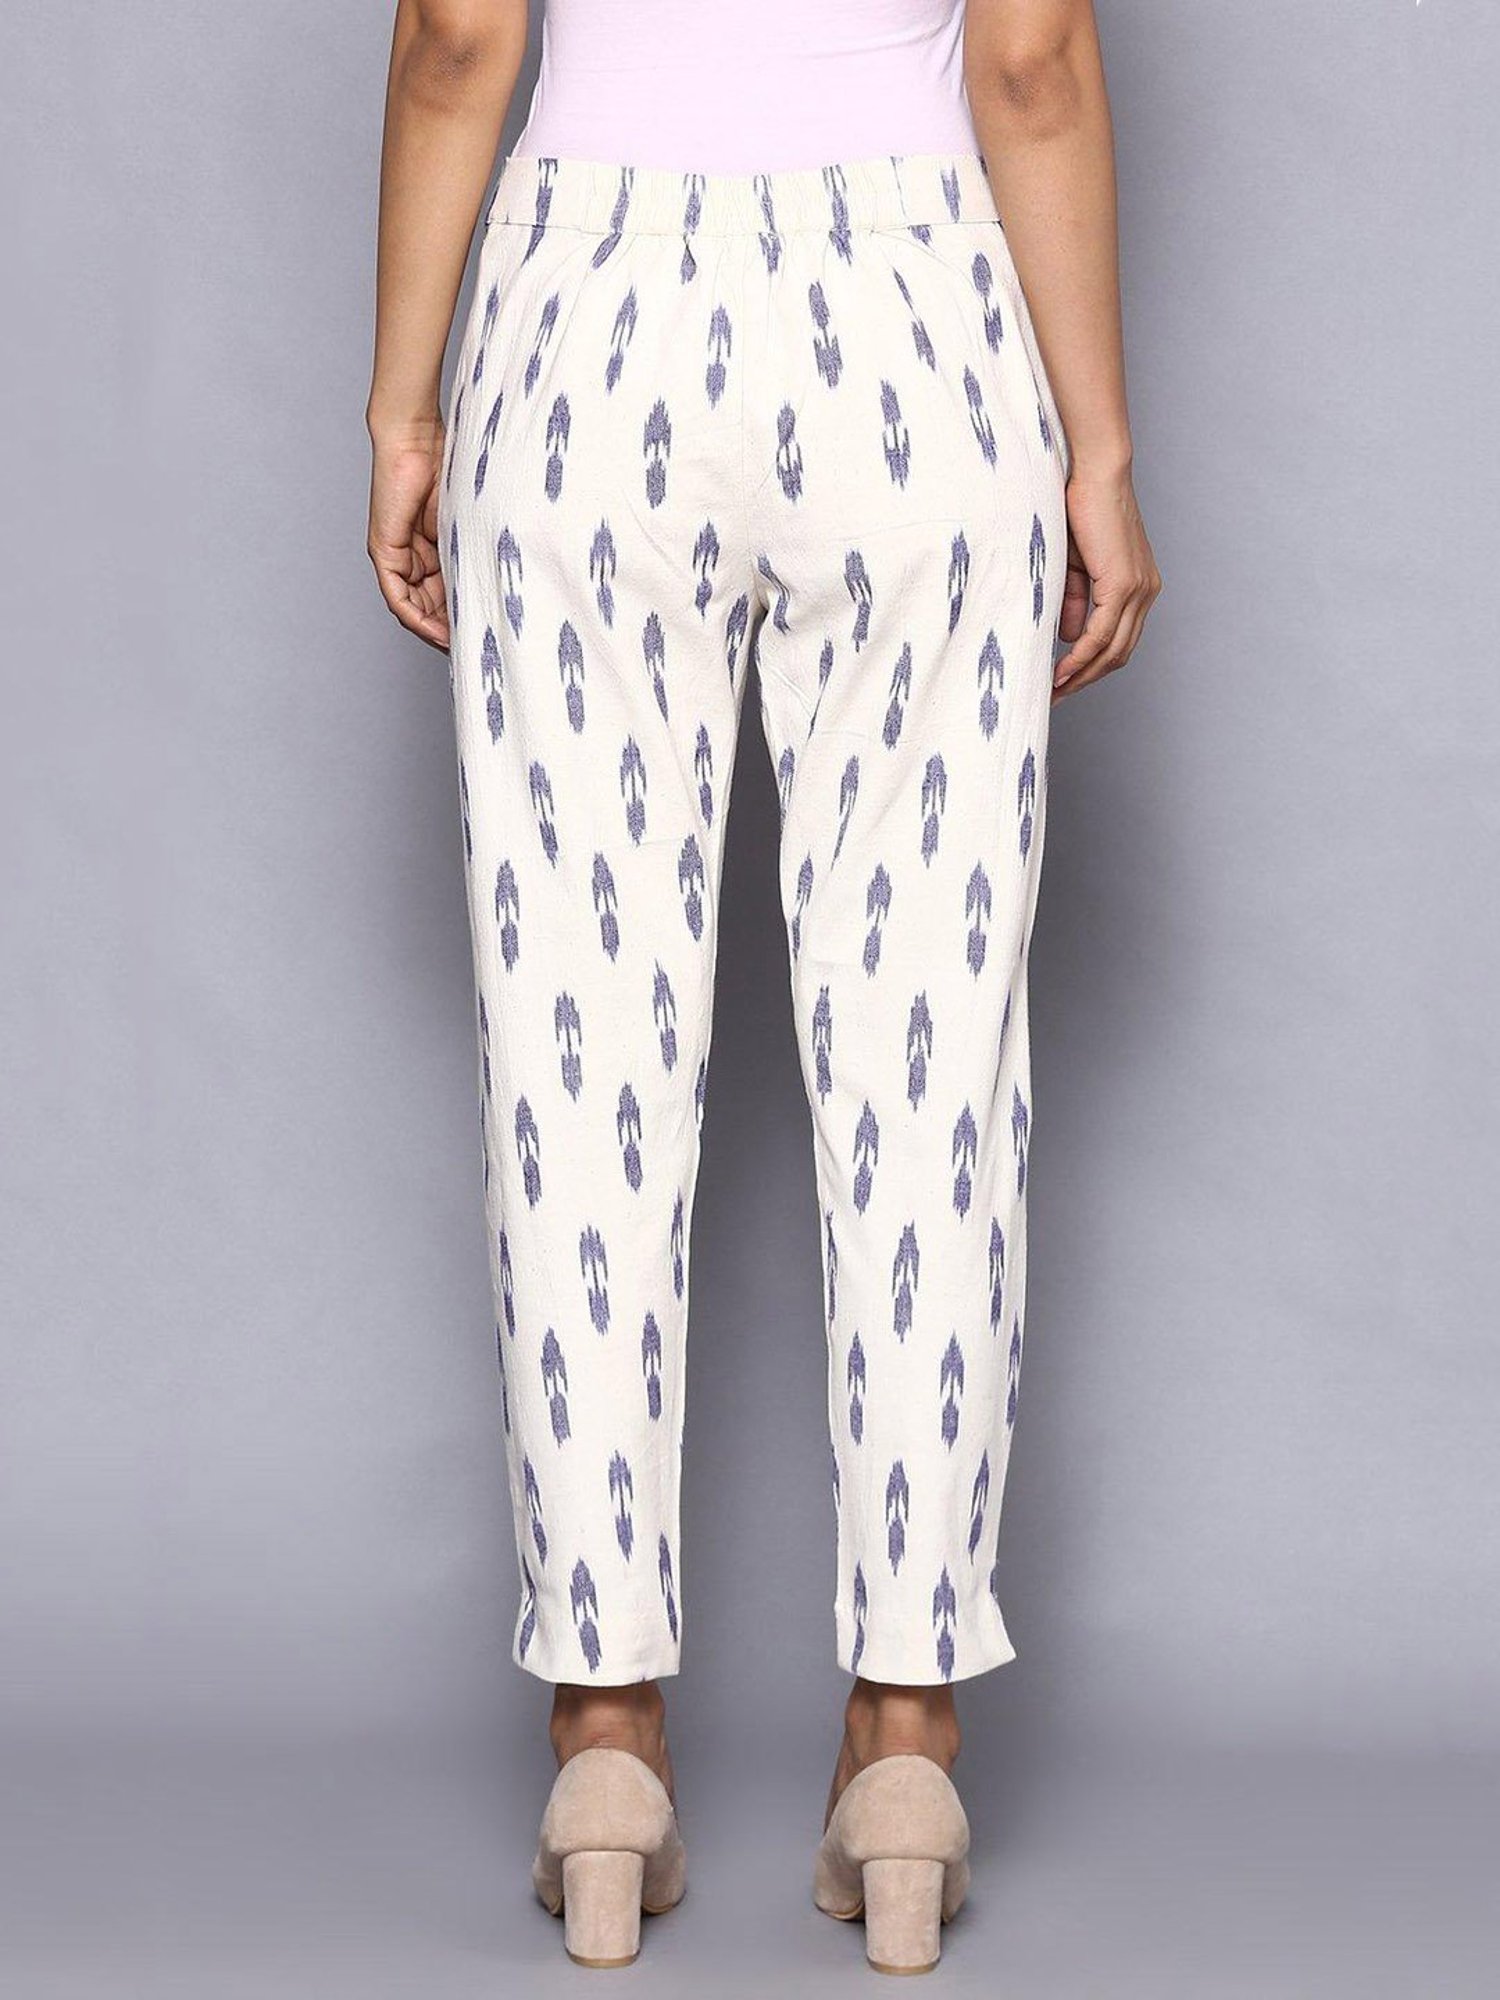 Buy BIBA White Cotton Straight Pants Online at Low Prices in India -  Paytmmall.com